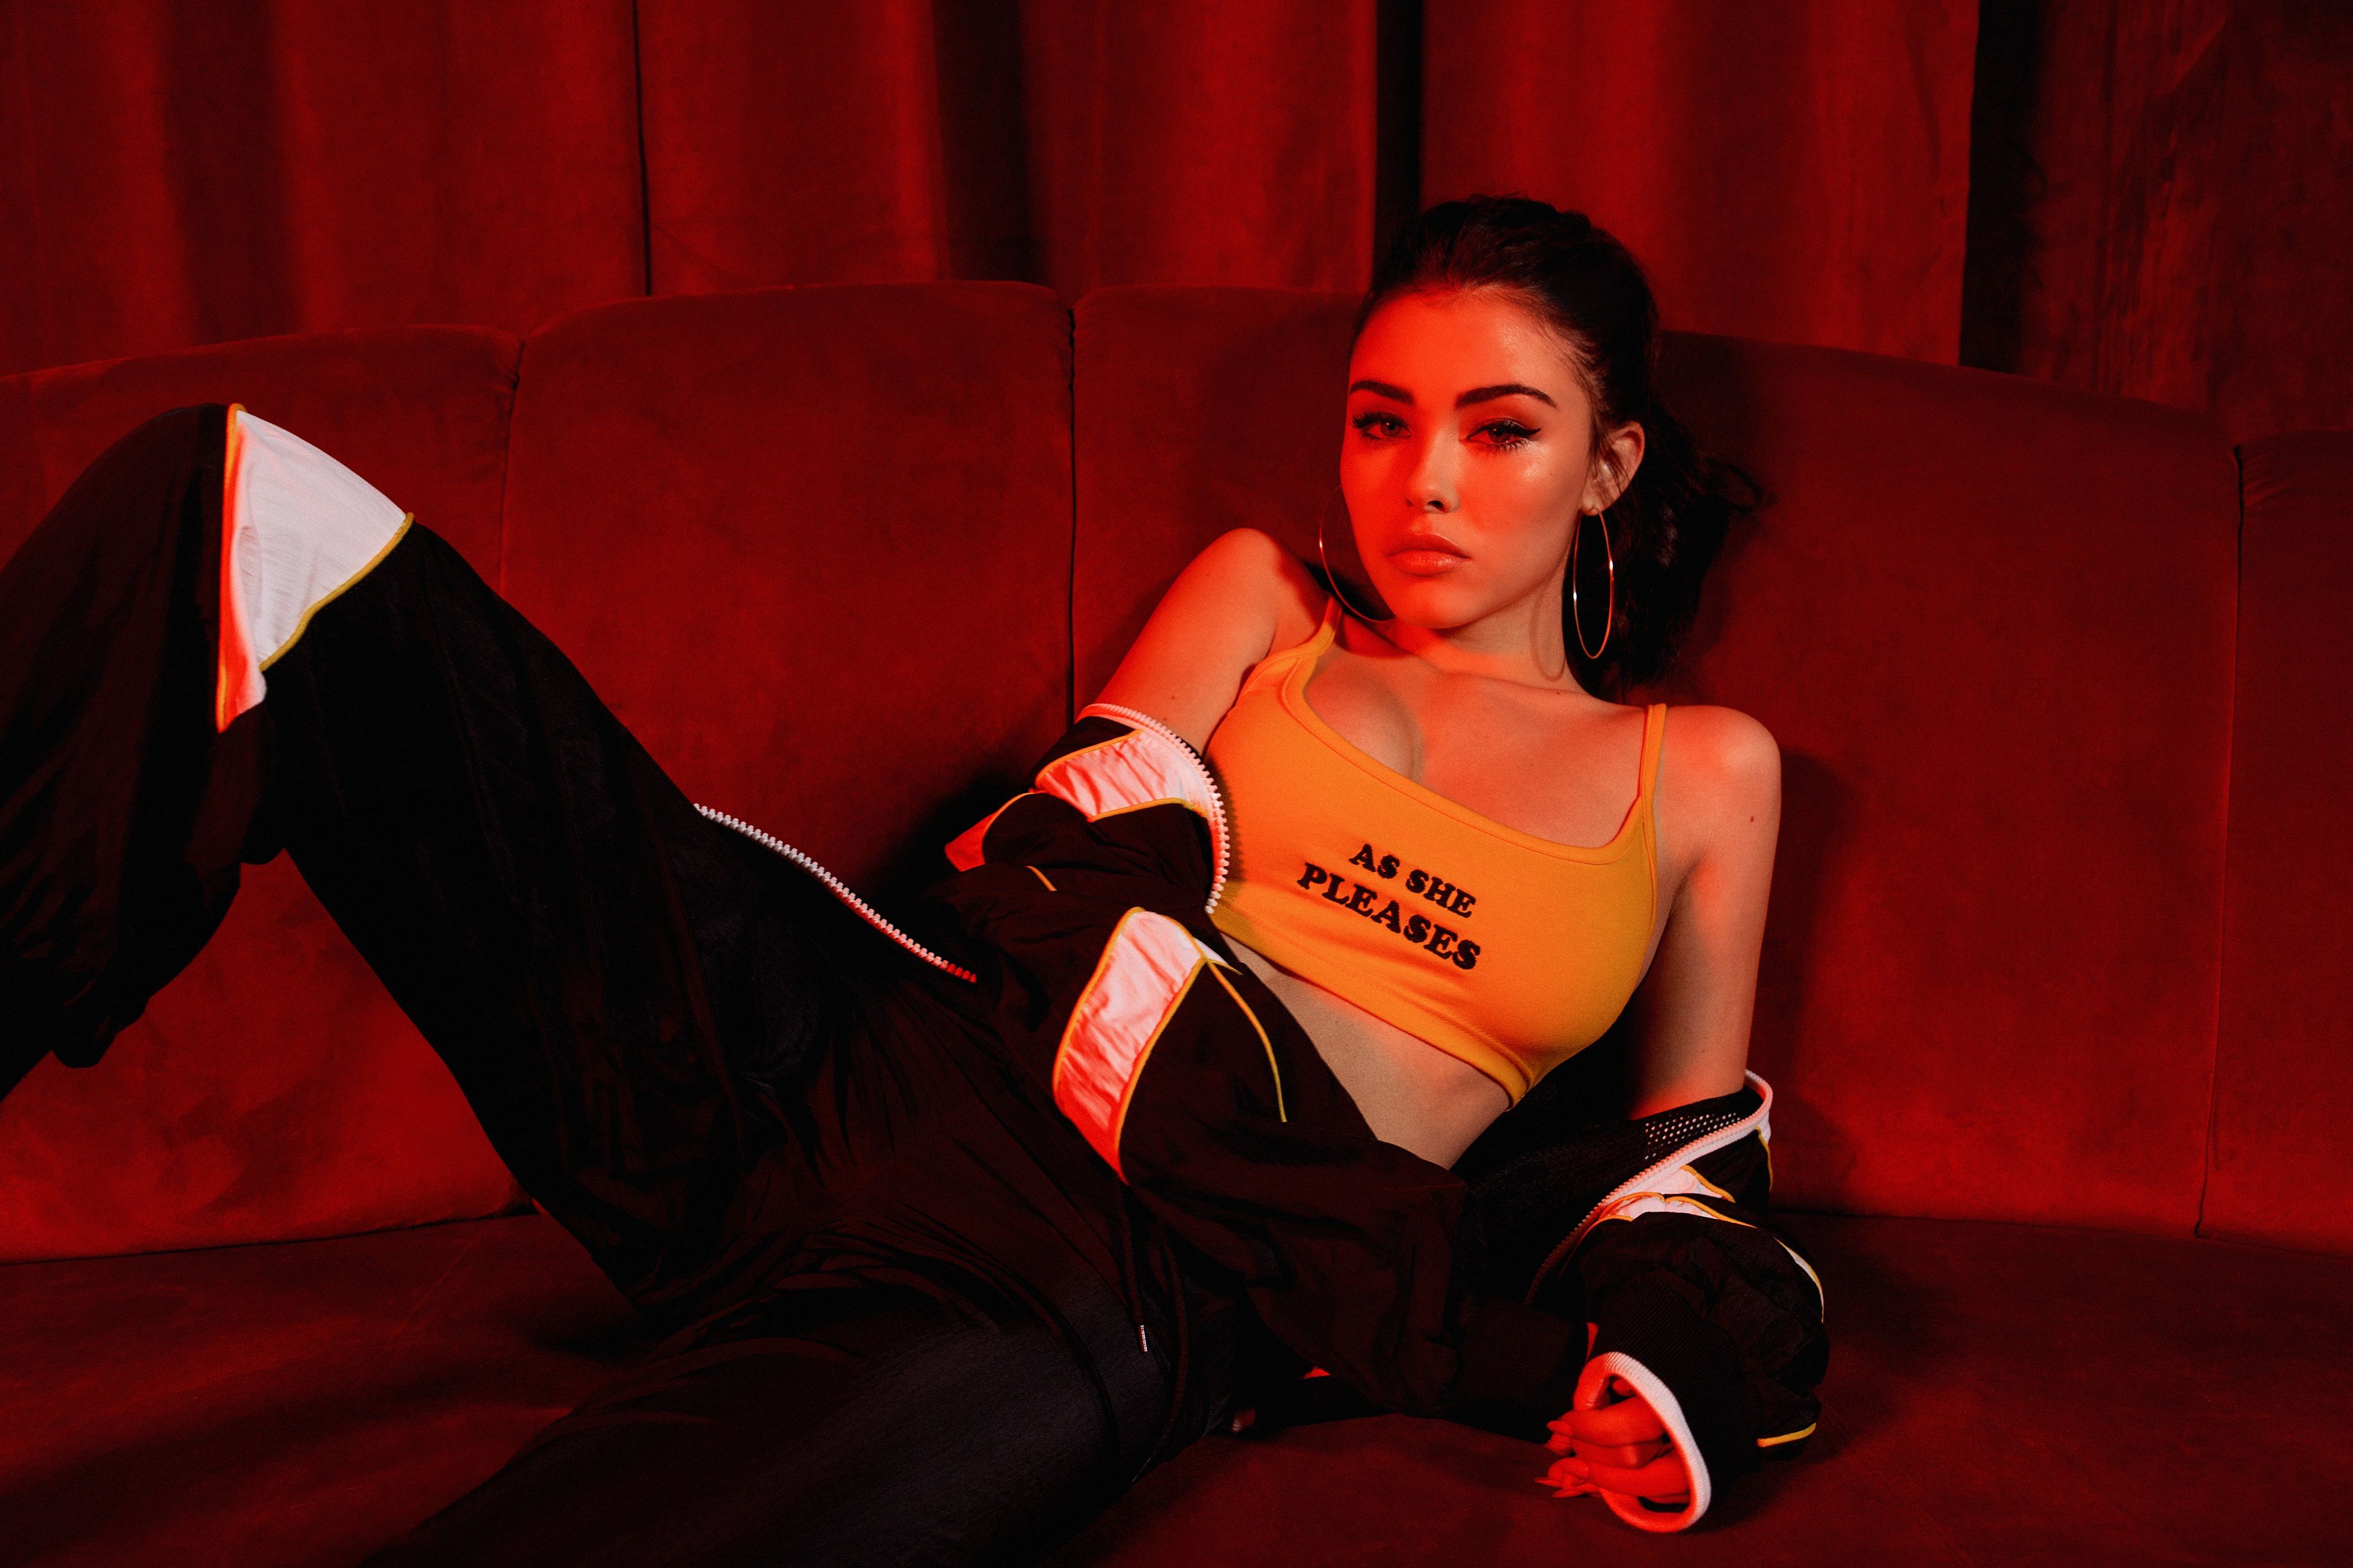 Madison Beer x Missguided 4k Ultra HD Wallpaper. Background Image